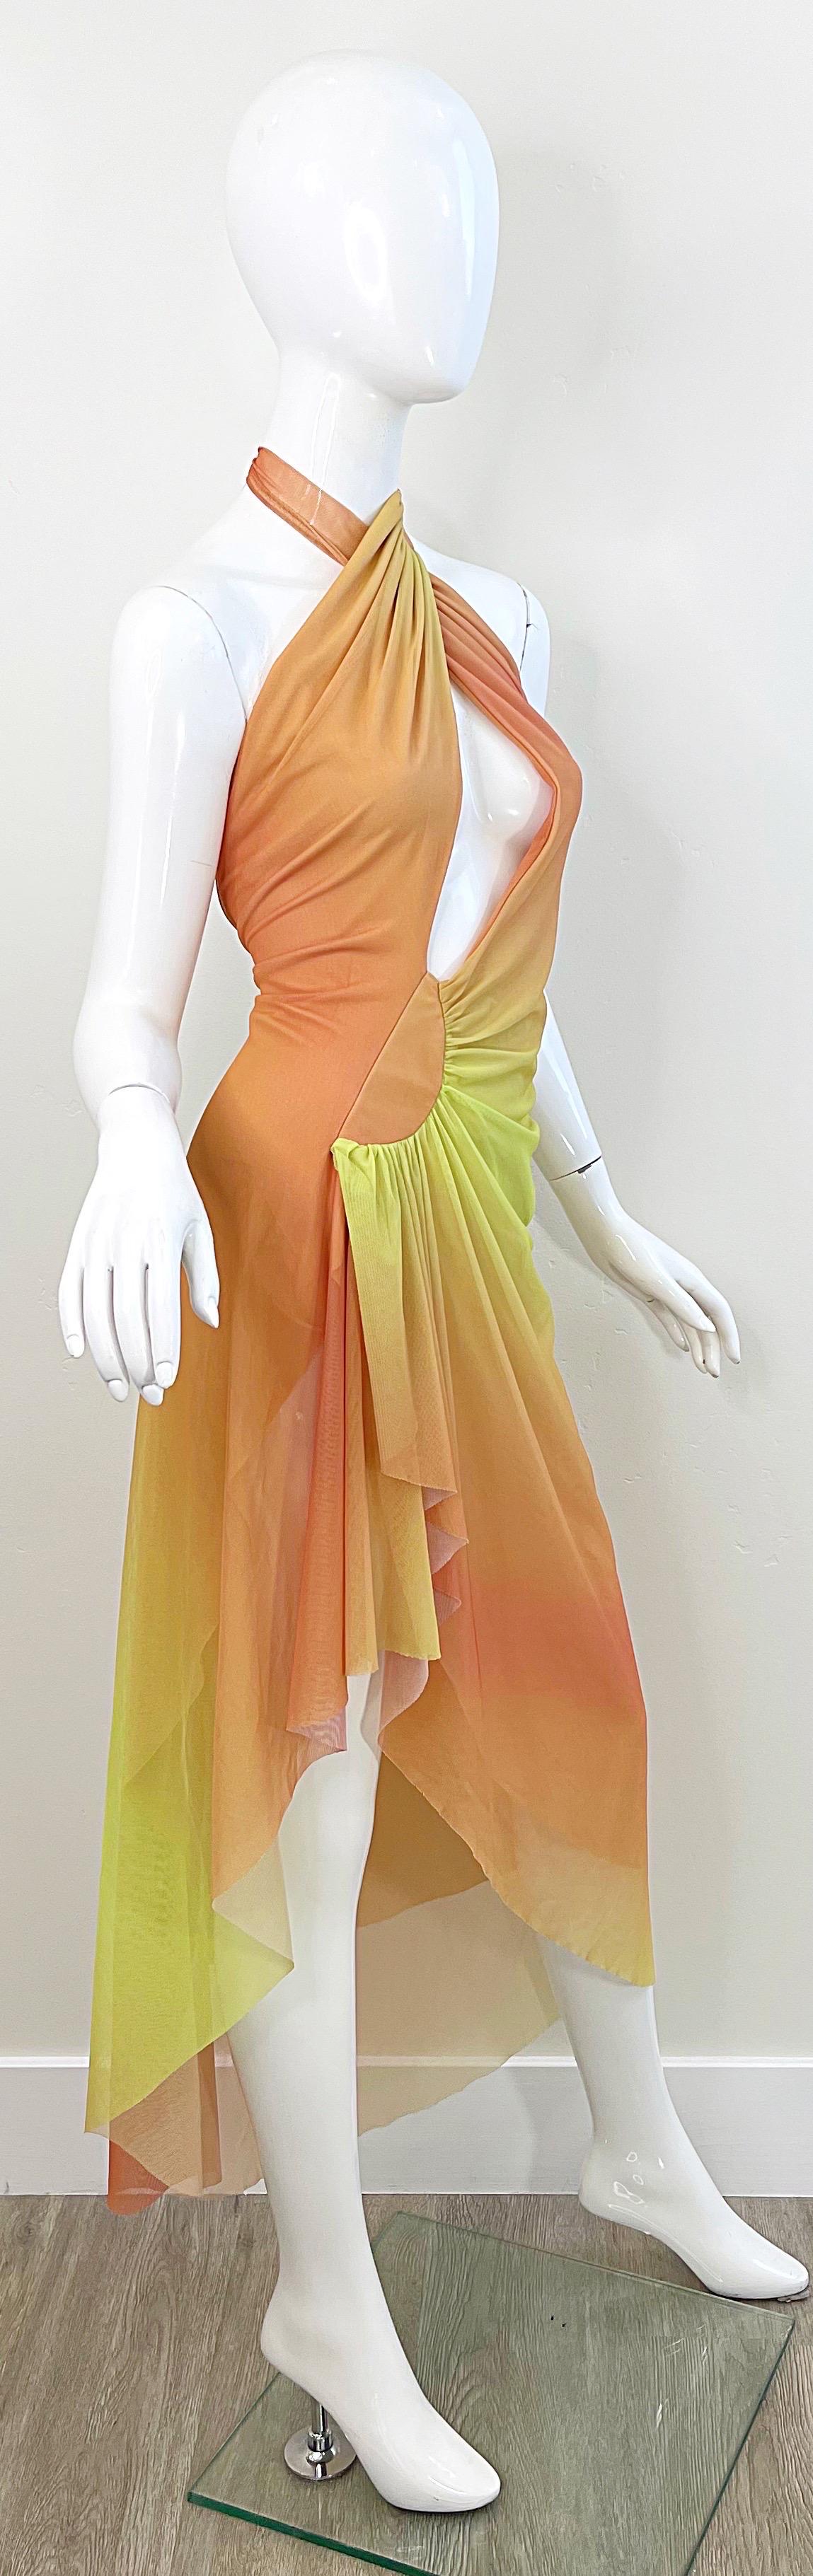 Ema Savahl 2000s Hand Dyed Ombré Orange Yellow Sexy Hi-Lo Halter Dress Y2K In Excellent Condition For Sale In San Diego, CA